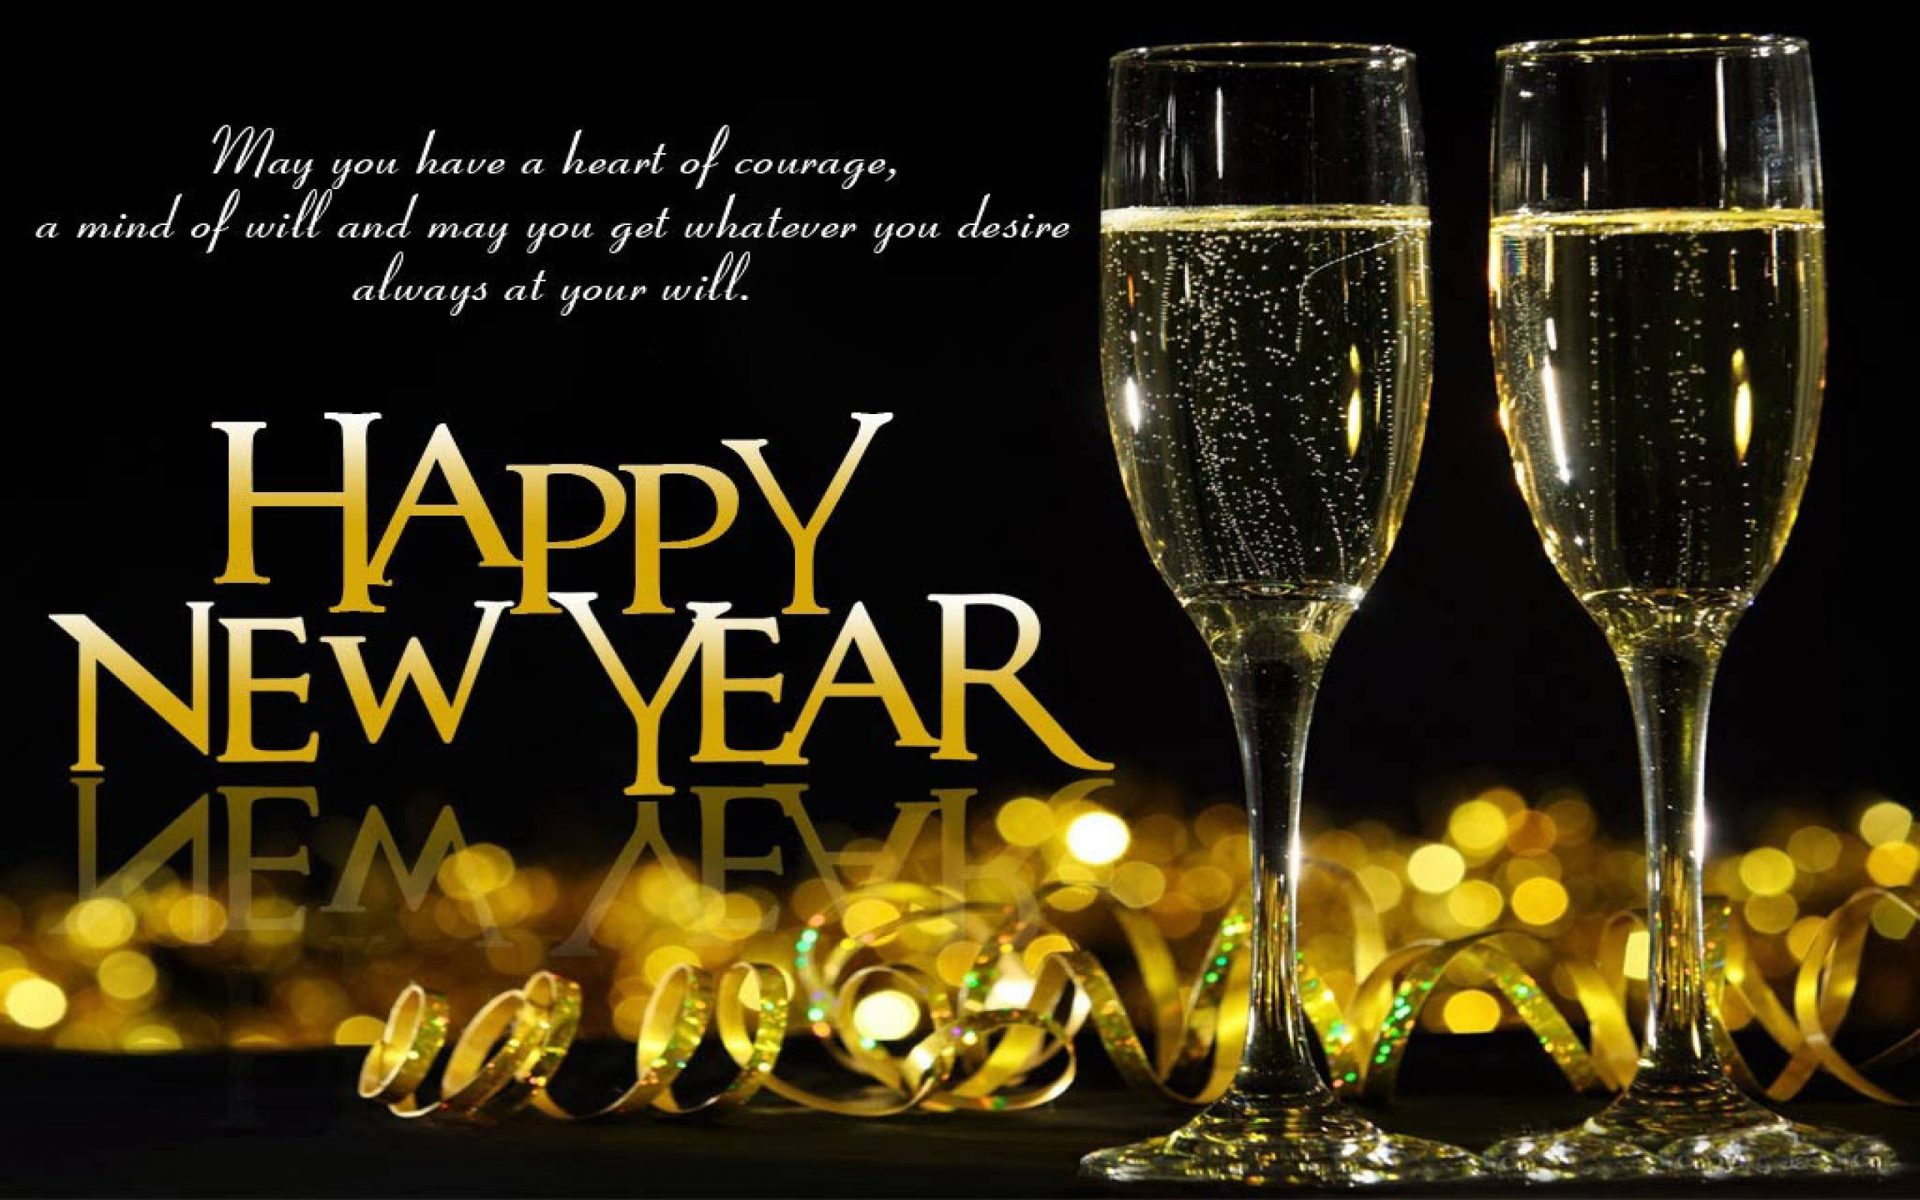 Happy New Year Champagne Glasses - HD Wallpaper 